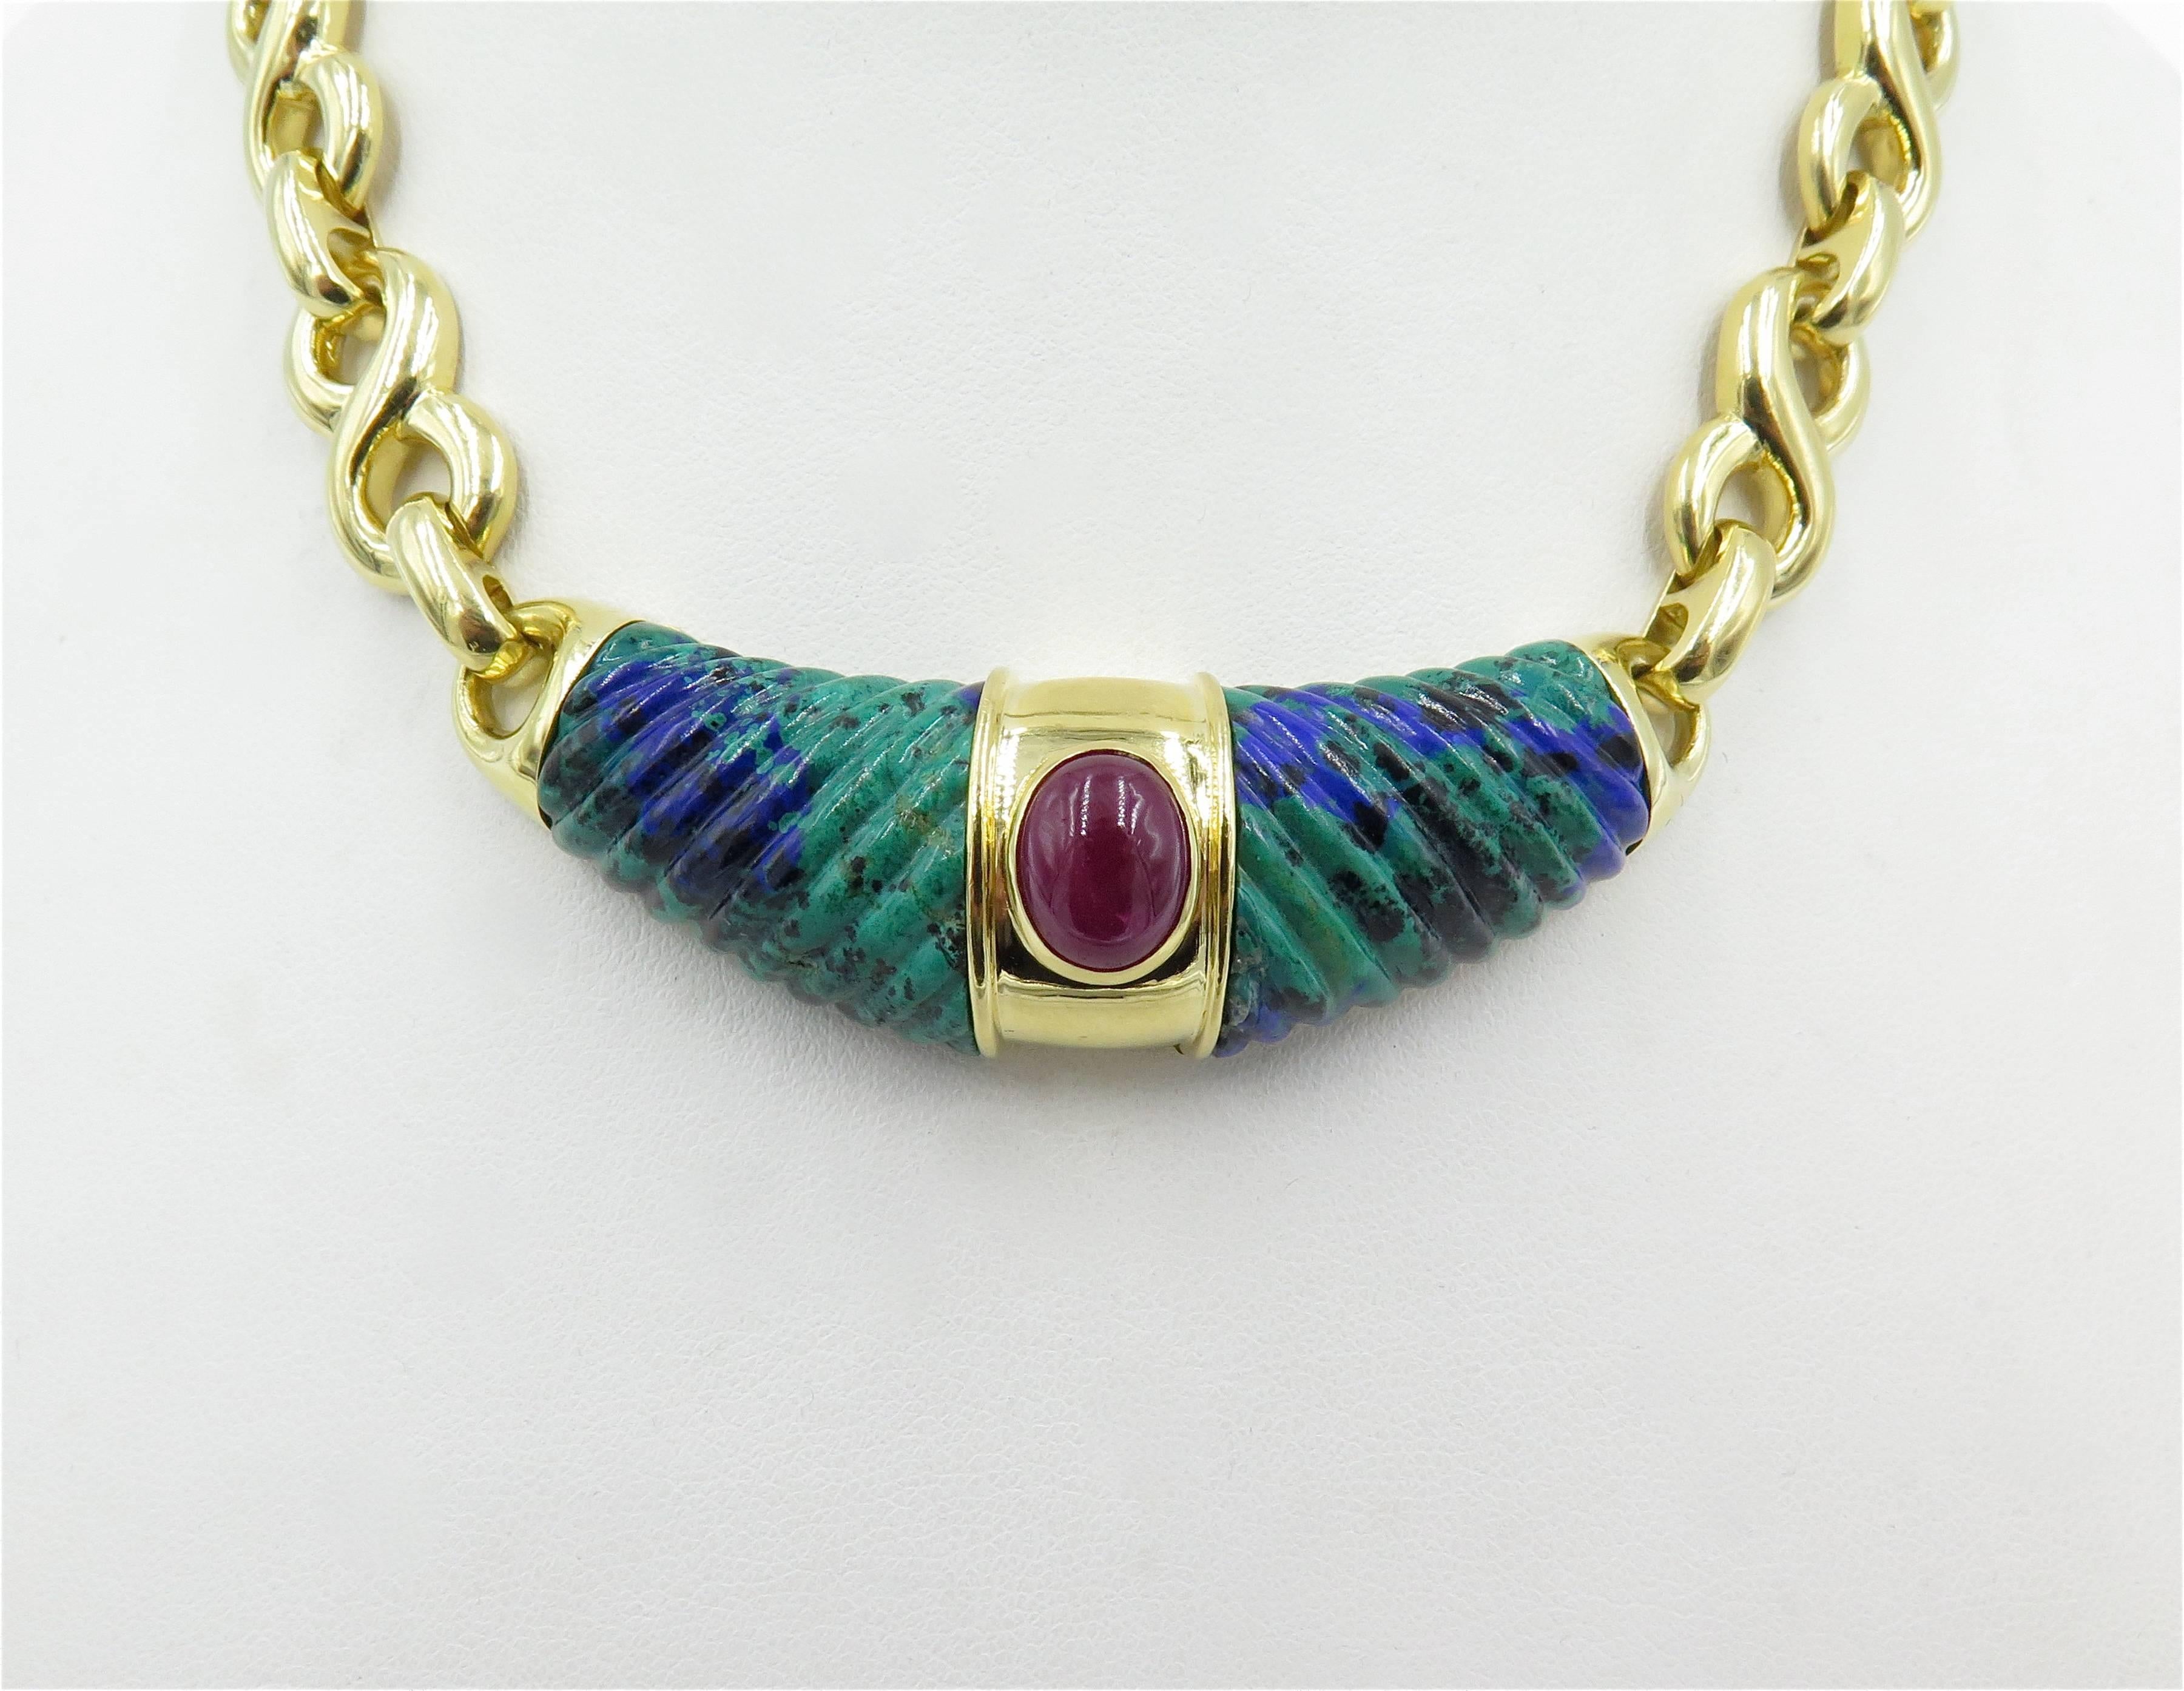 An 18 karat yellow gold, azurmalachite and ruby necklace. David Webb. Circa 1990.  Centering a caved azurmalachite panel, centering an oval cabochon ruby, suspended from a polished figure 8 link chain. Length is approximately 14 inches.  Gross